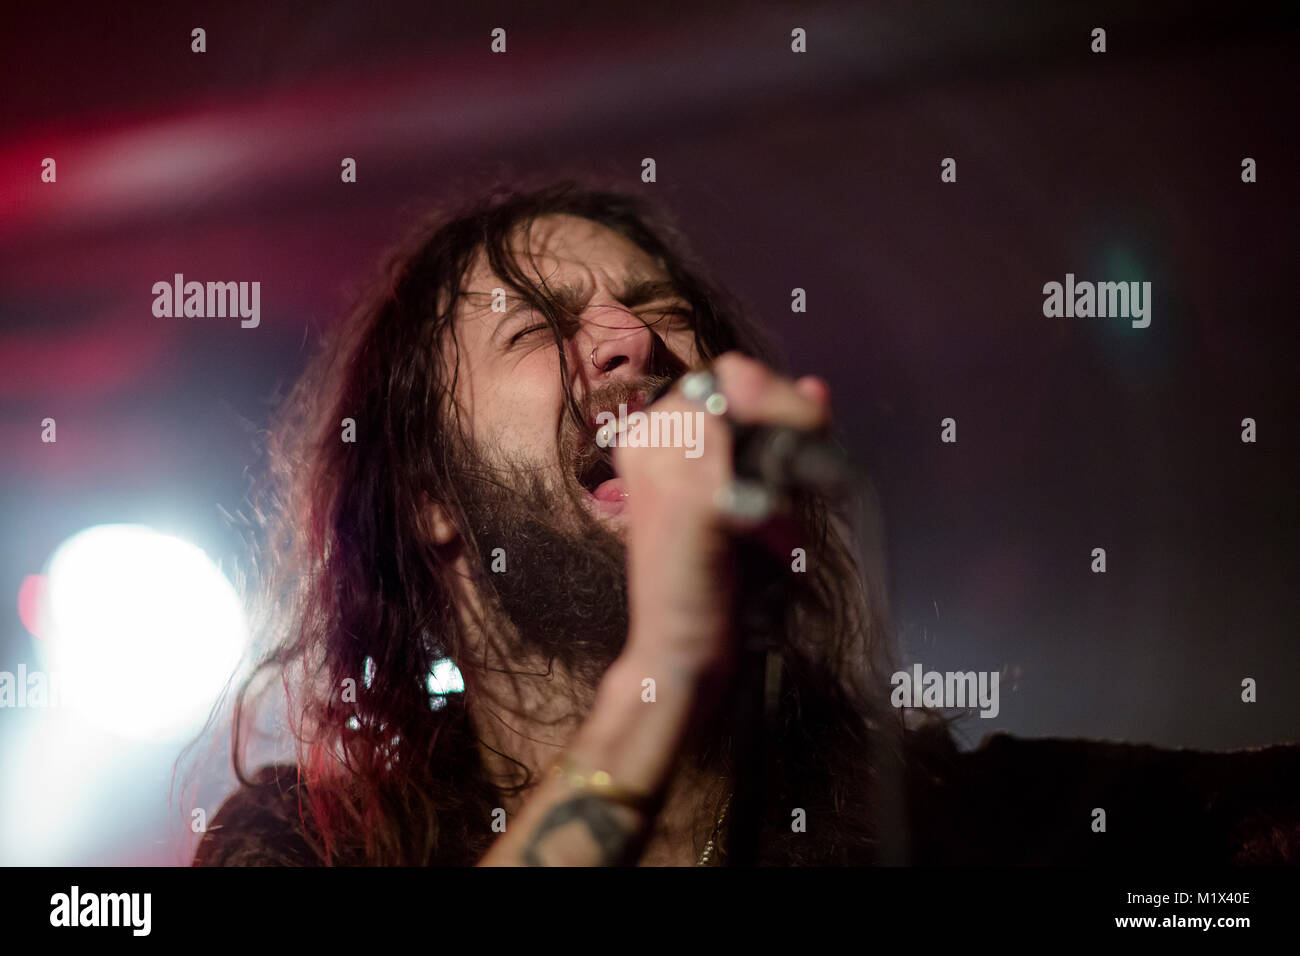 The American hard rock band Scorpion Child performs live at Garage in Bergen. Here vocalist Aryn Jonathan Black is seen live on stage. Norway, 07/03 2016. Stock Photo